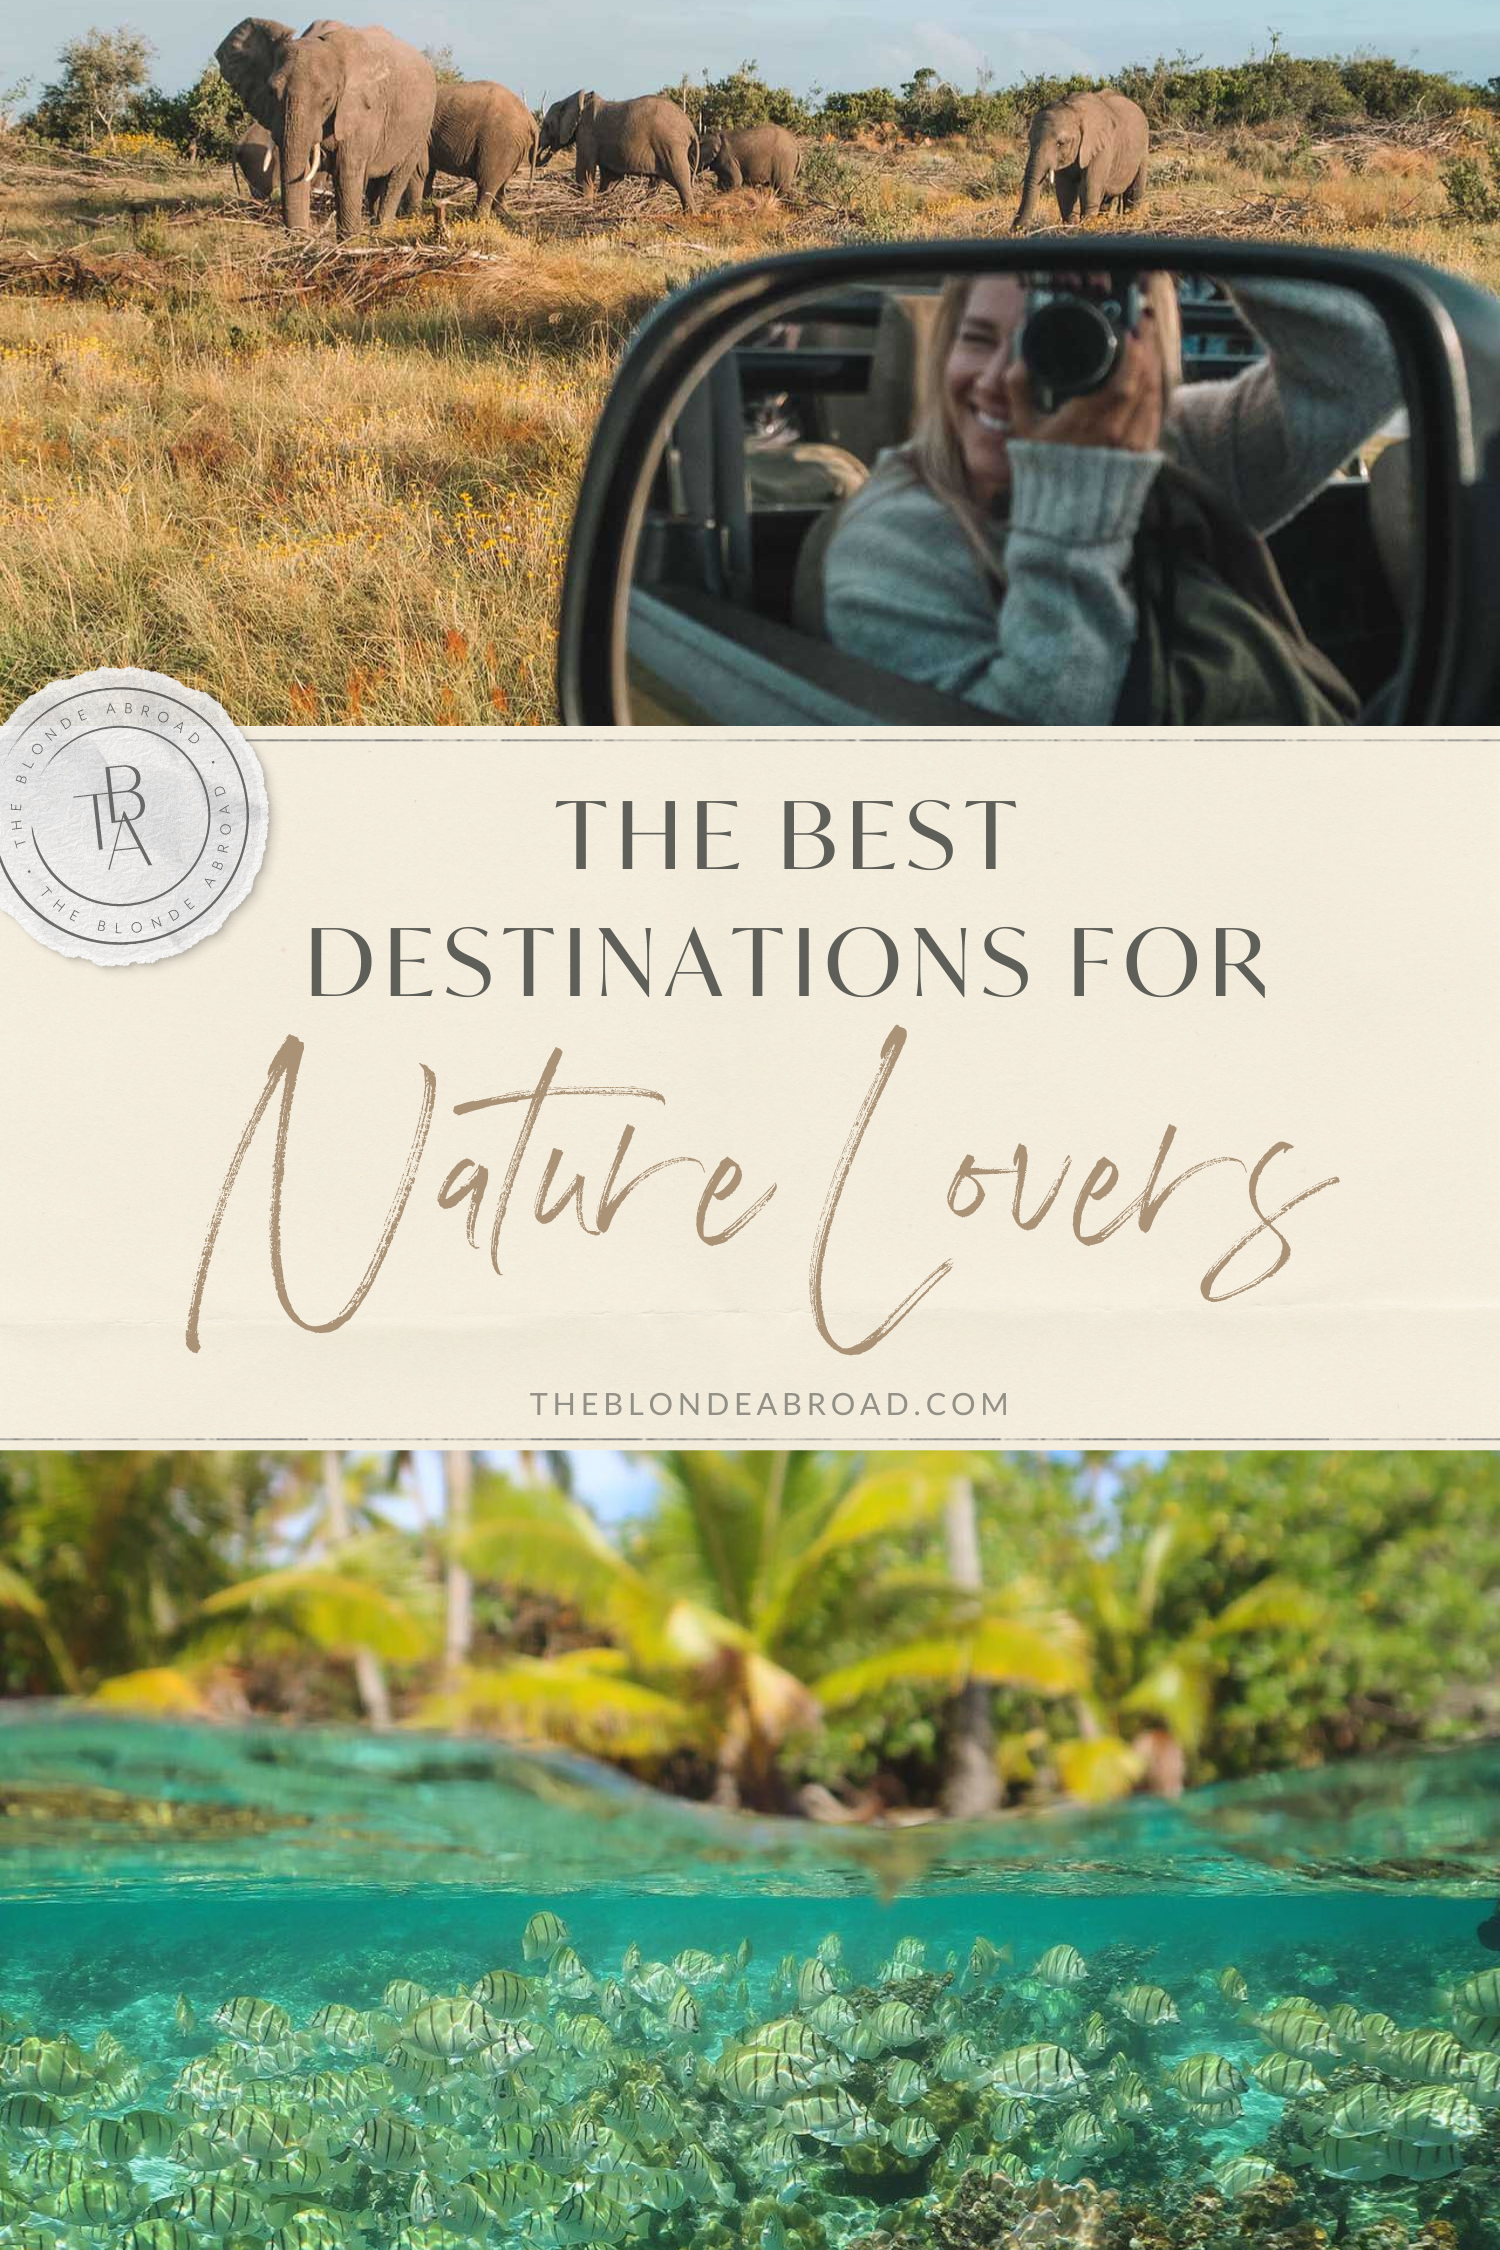 The Best Destinations for Nature Lovers